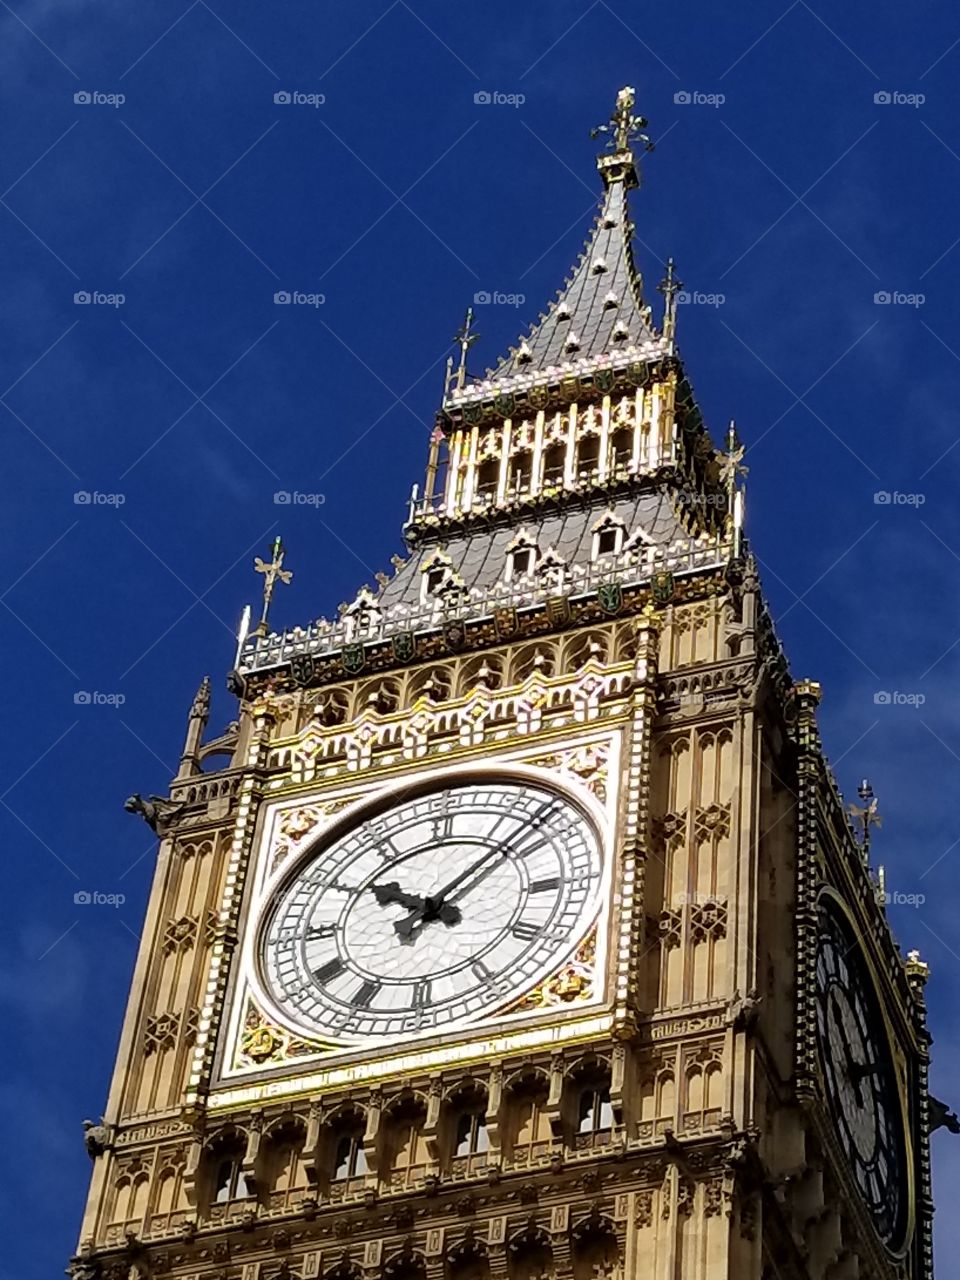 up close view of Big Ben in London